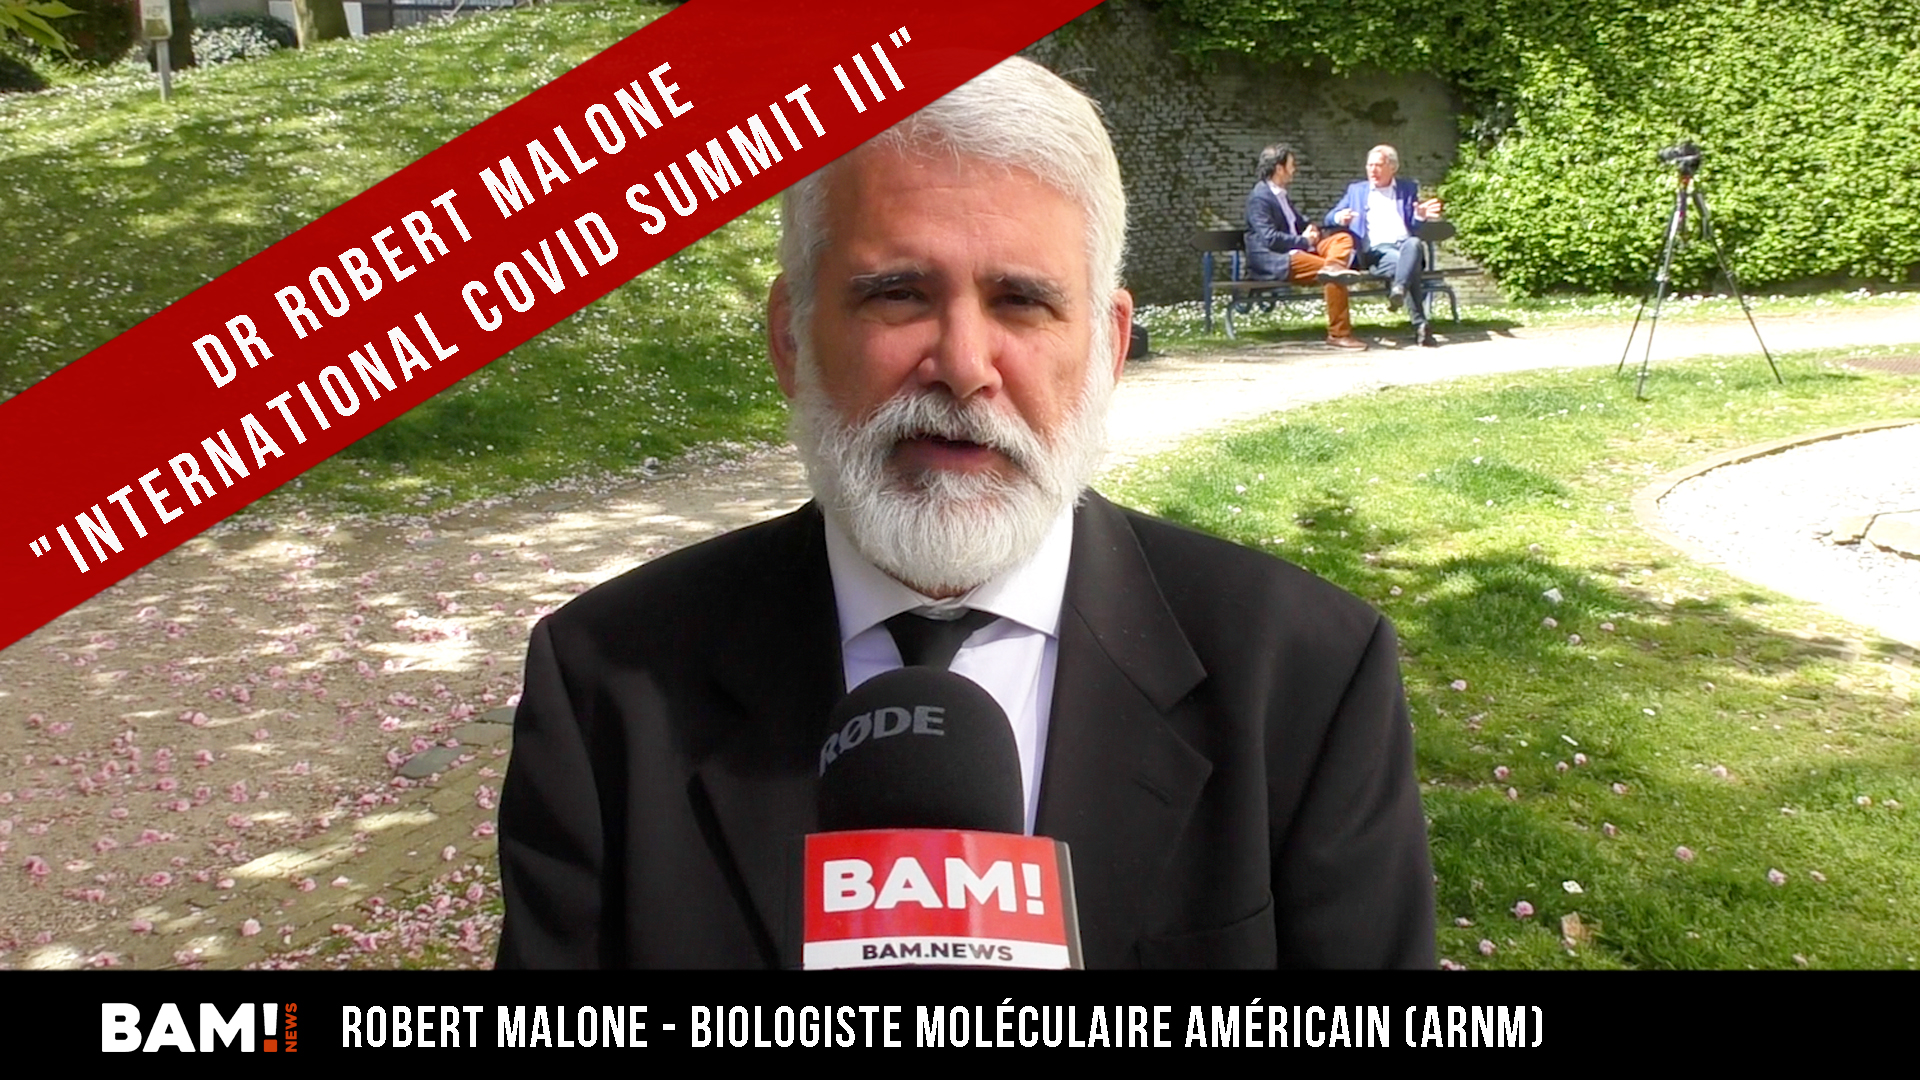 ITW Dr Robert Malone - Biologiste moléculaire